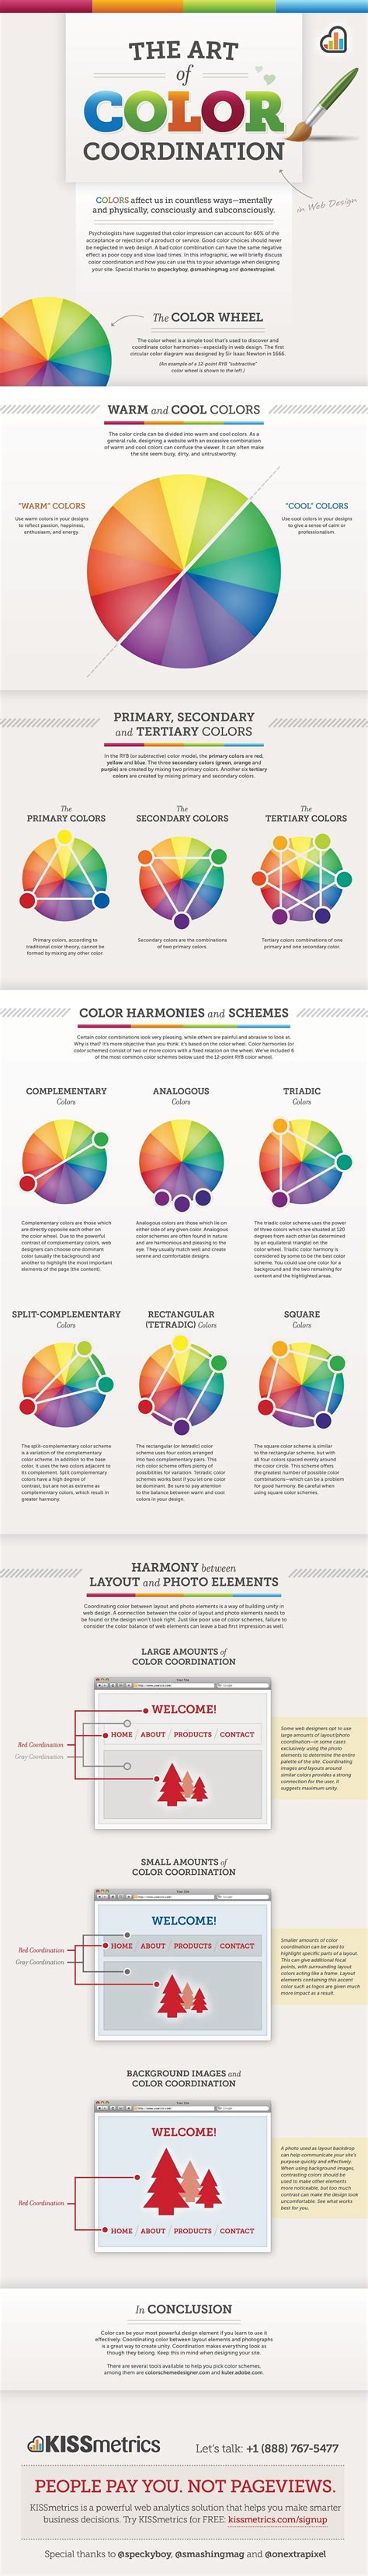 50 Bestgraphics For Web Designers Color Theory Edition Coloring Wallpapers Download Free Images Wallpaper [coloring654.blogspot.com]